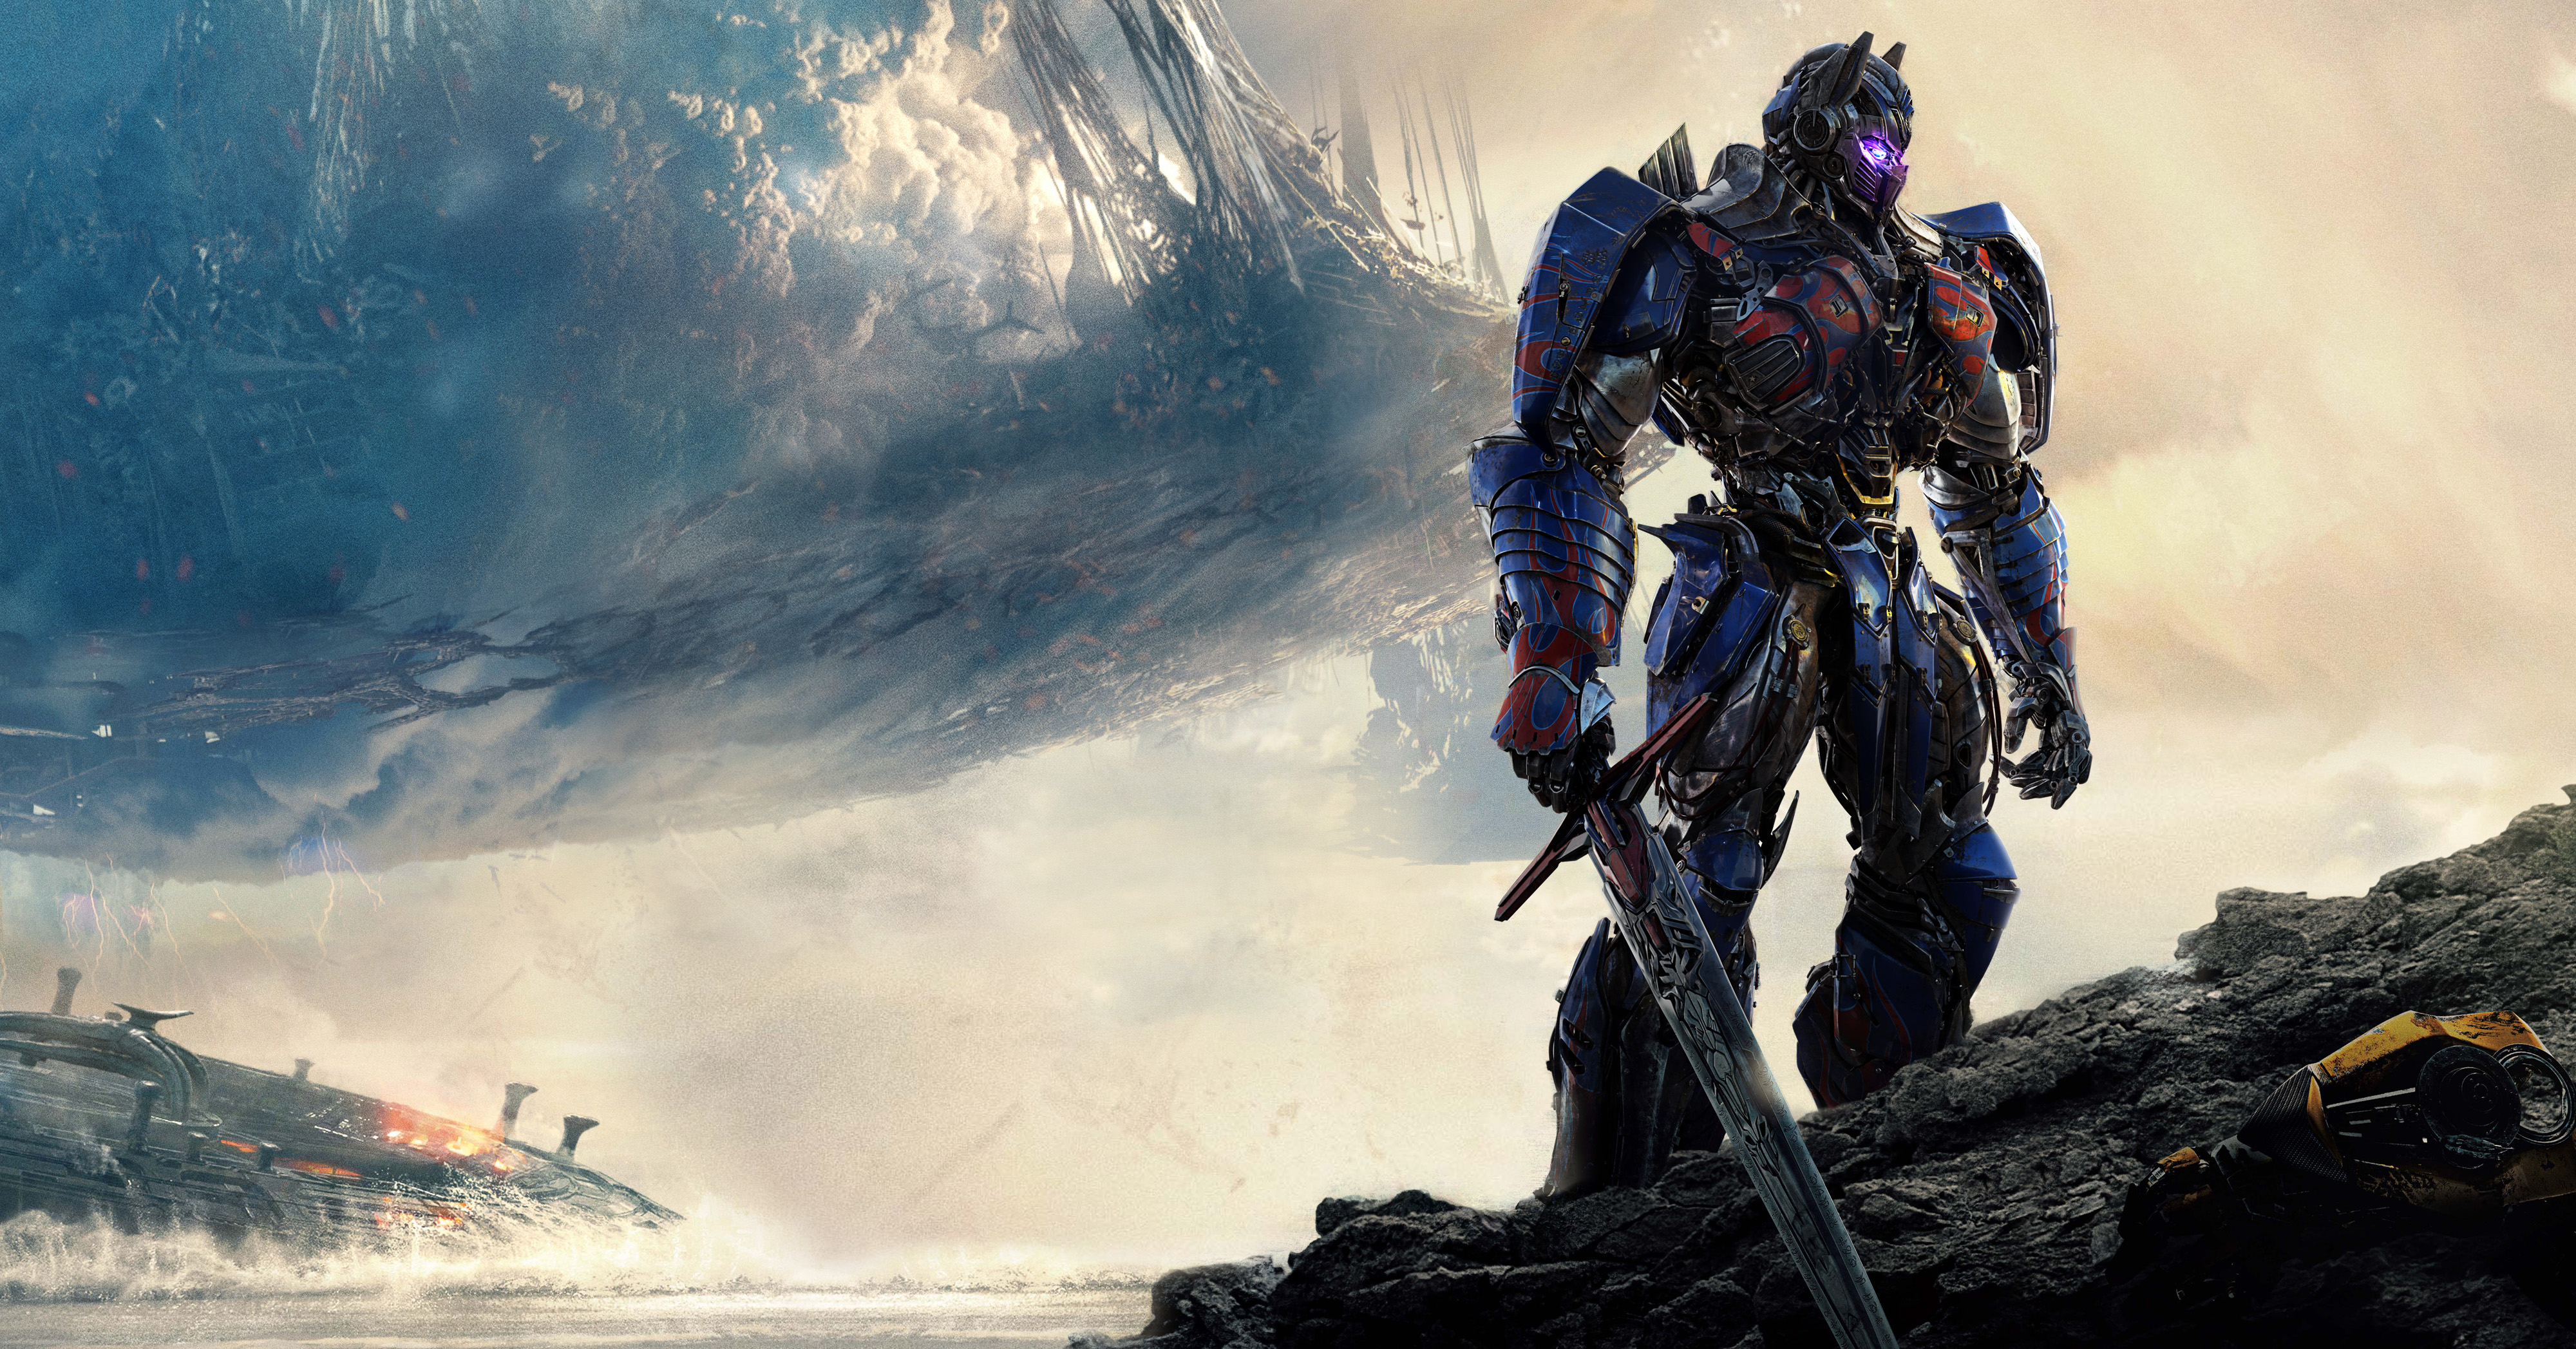 Transformers: The Last Knight Backgrounds, Pictures, Images